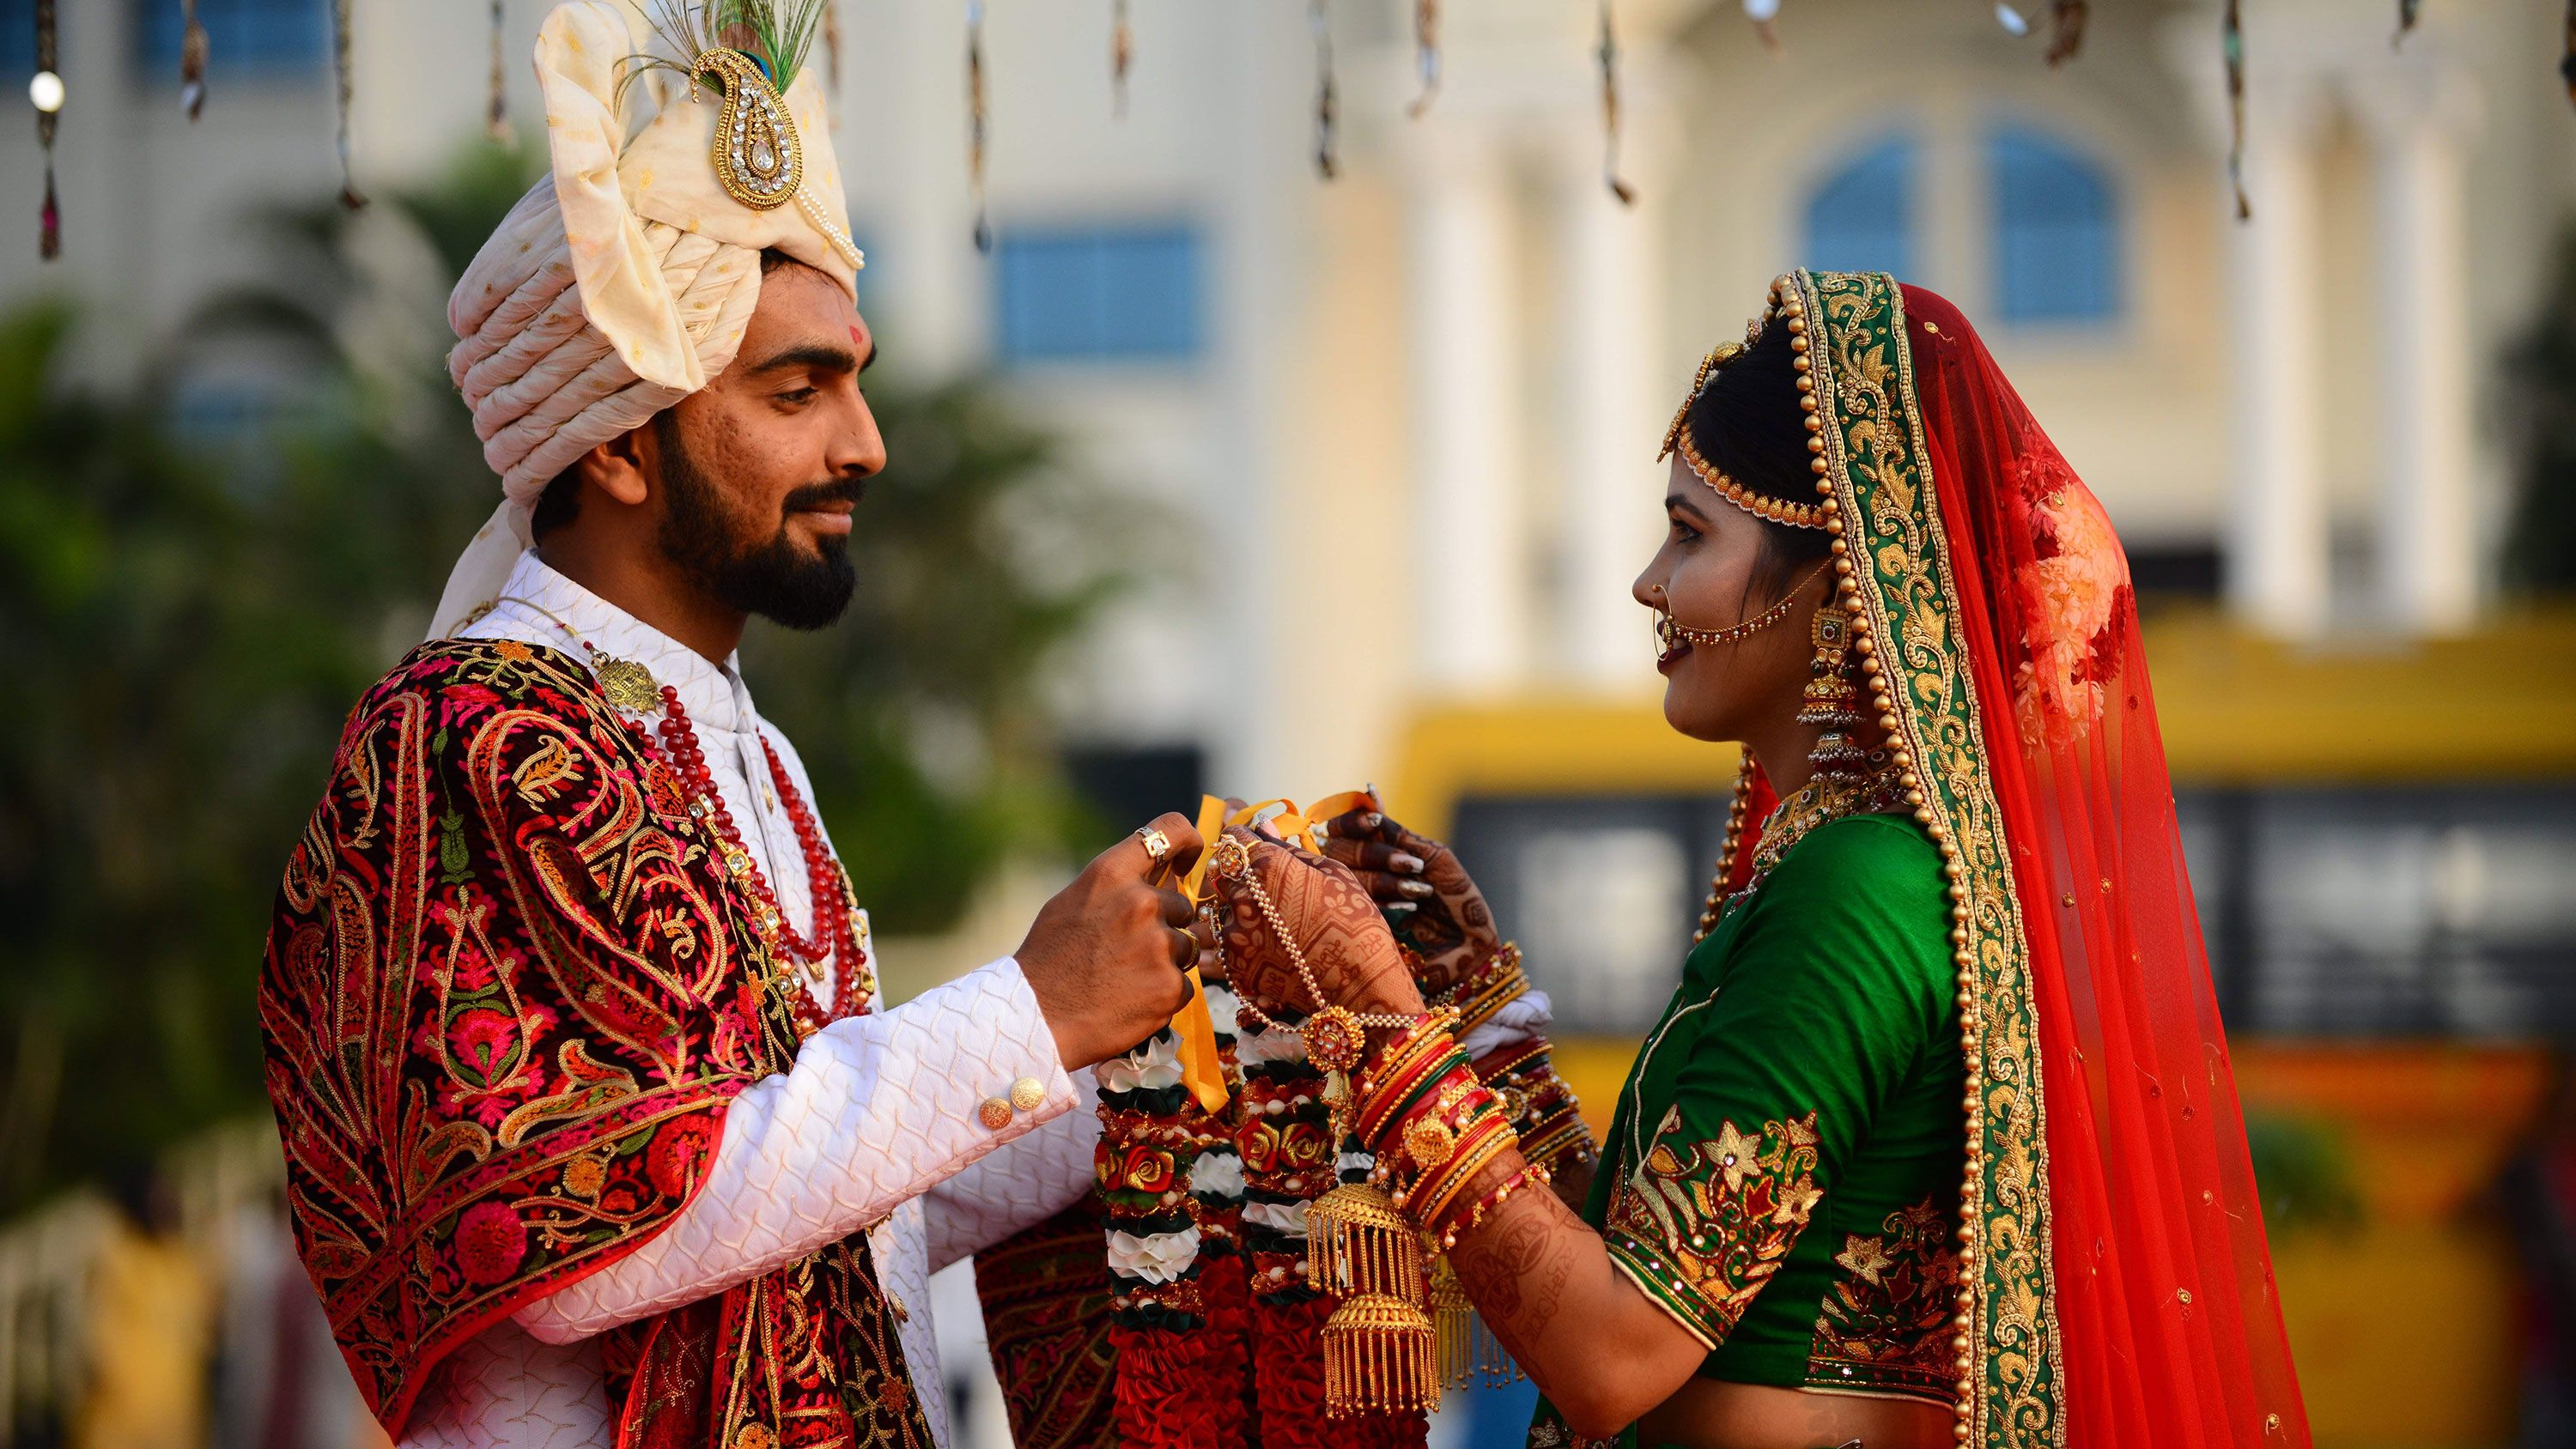 India loves an arranged marriage, but some say certain aspects are outdated  | CNN